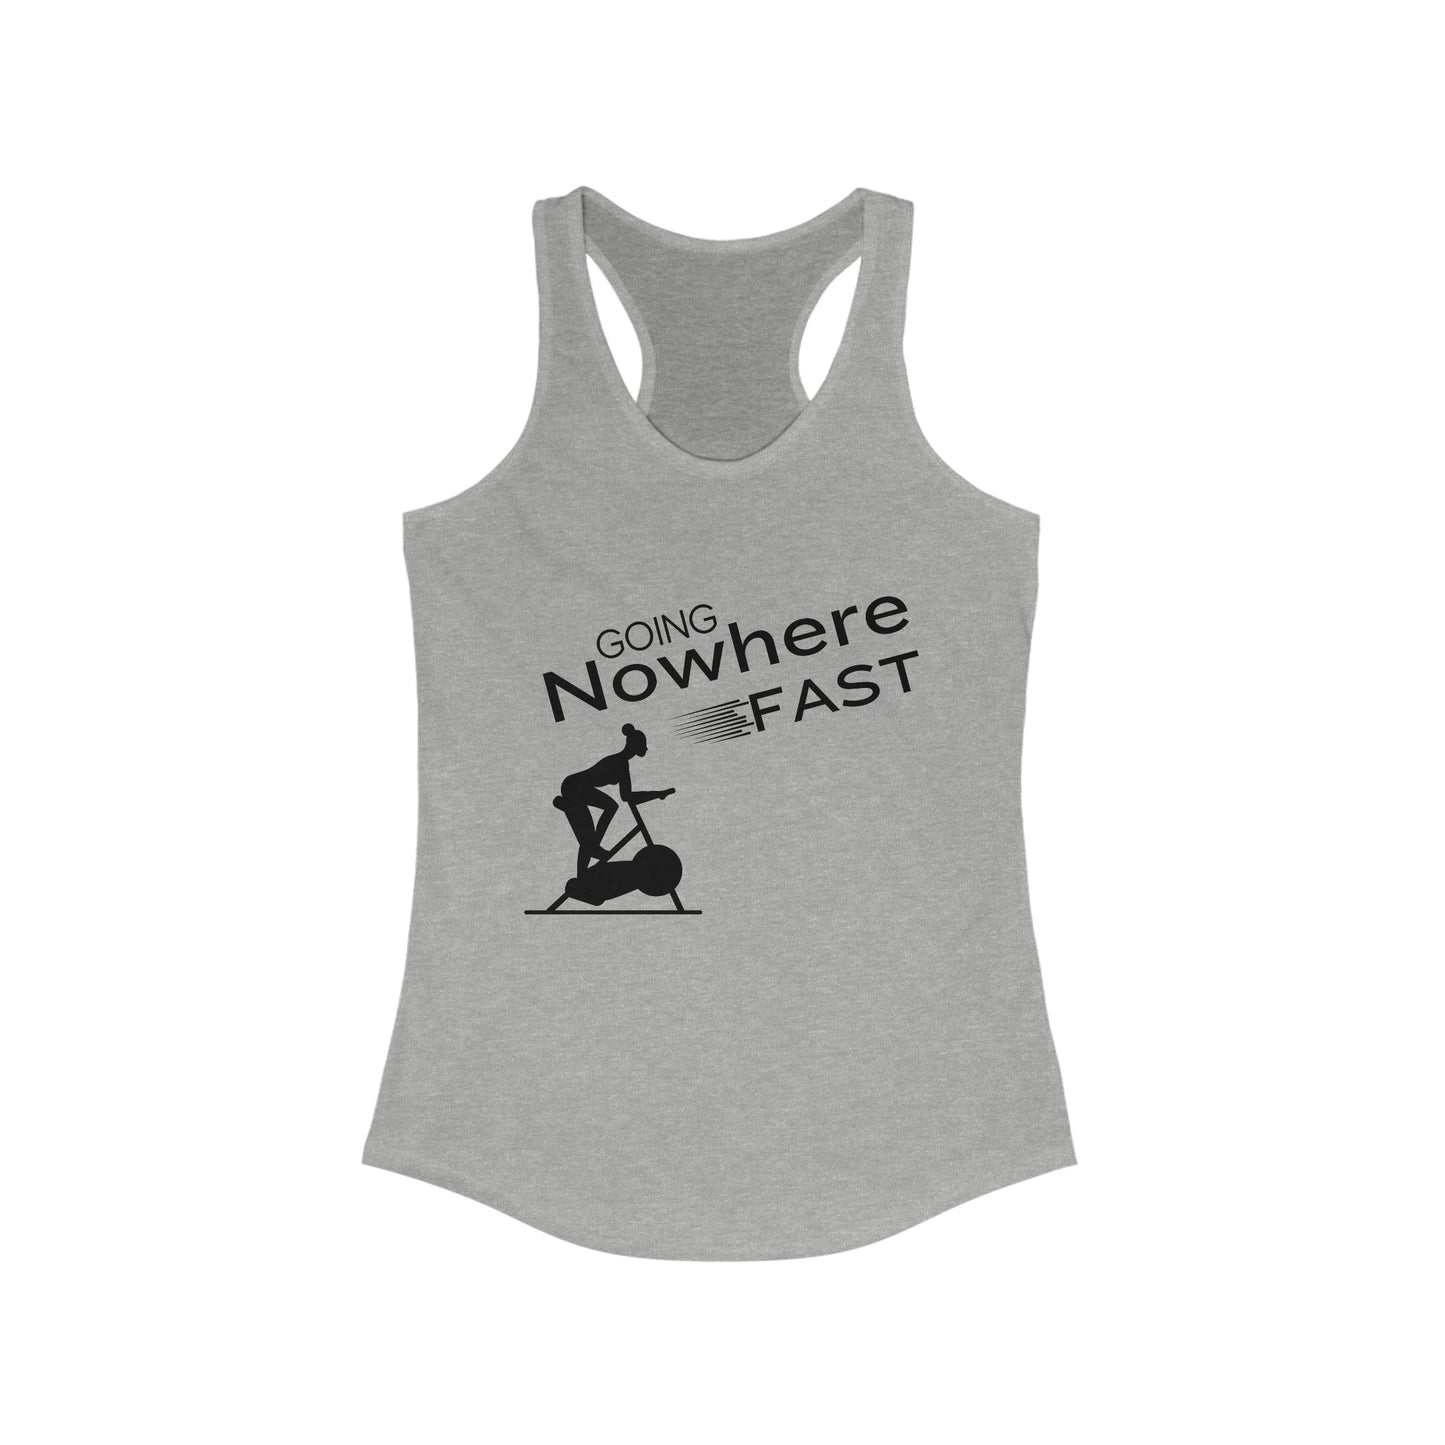 Going nowhere fast! Spin class Tank Top